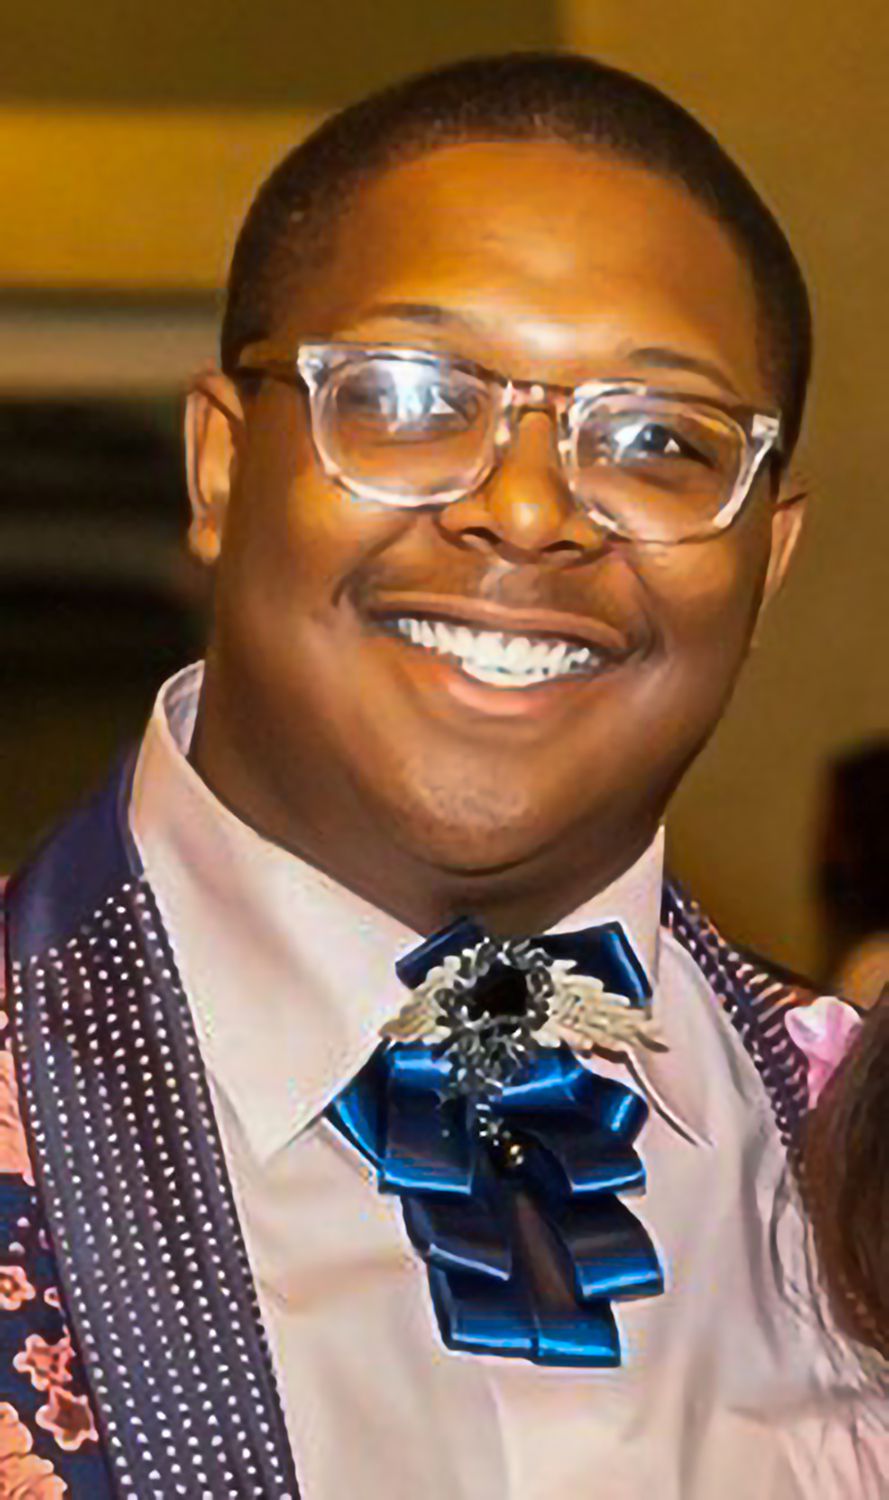 Trey Cunningham, wearing a blue frilled tie and glasses, smiles at the viewer.